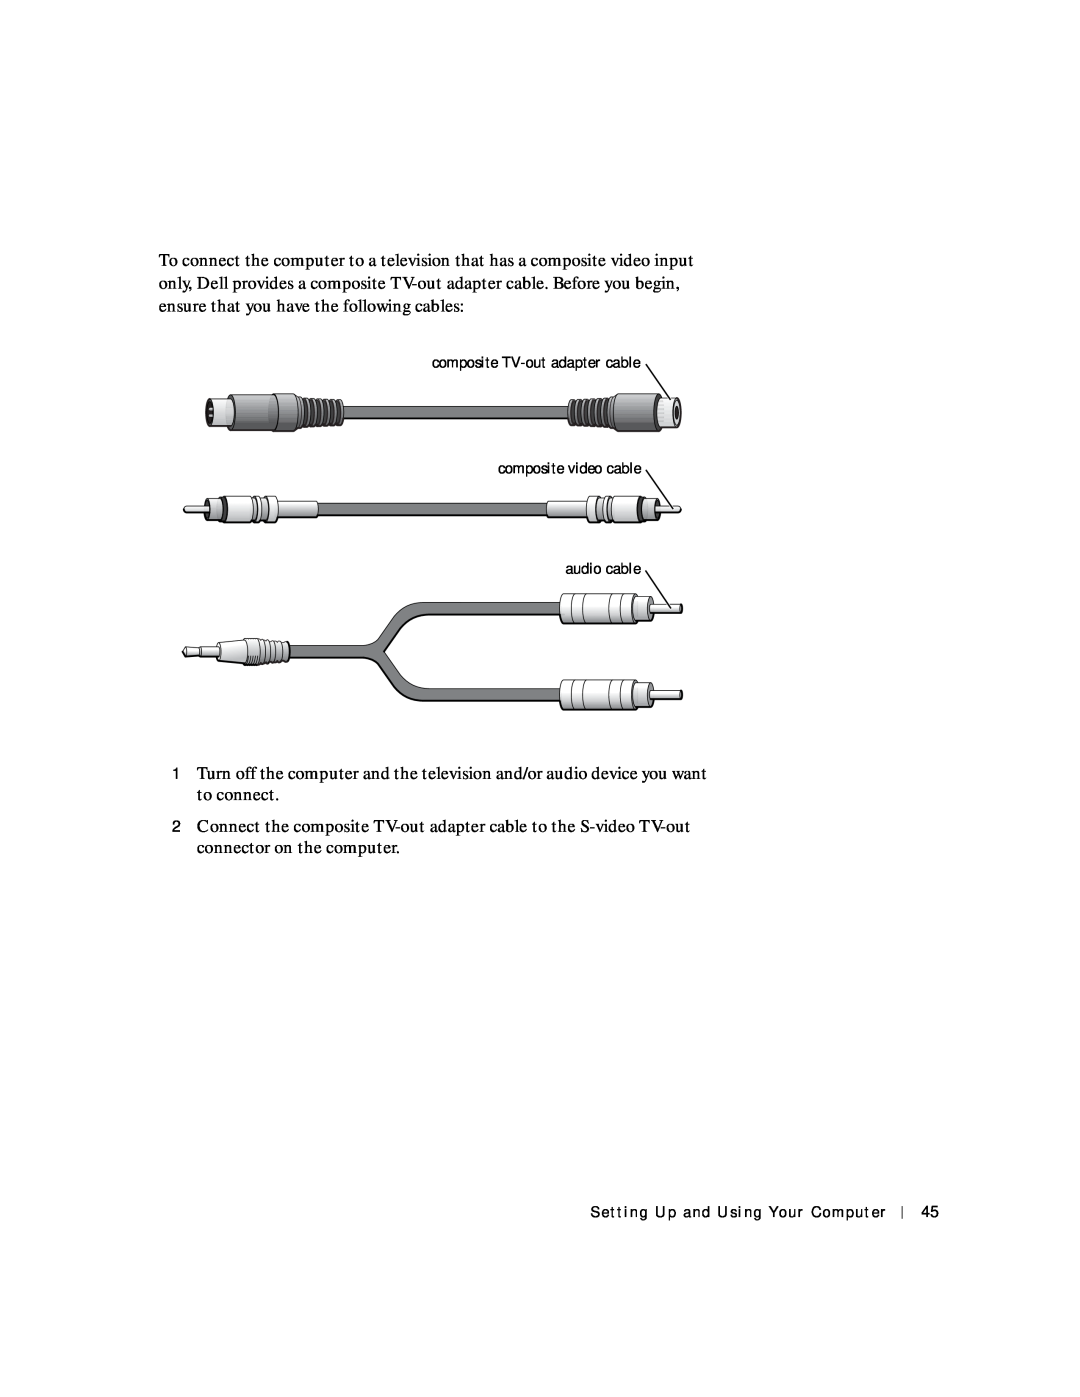 Dell 4150 owner manual composite TV-out adapter cable composite video cable audio cable, Setting Up and Using Your Computer 